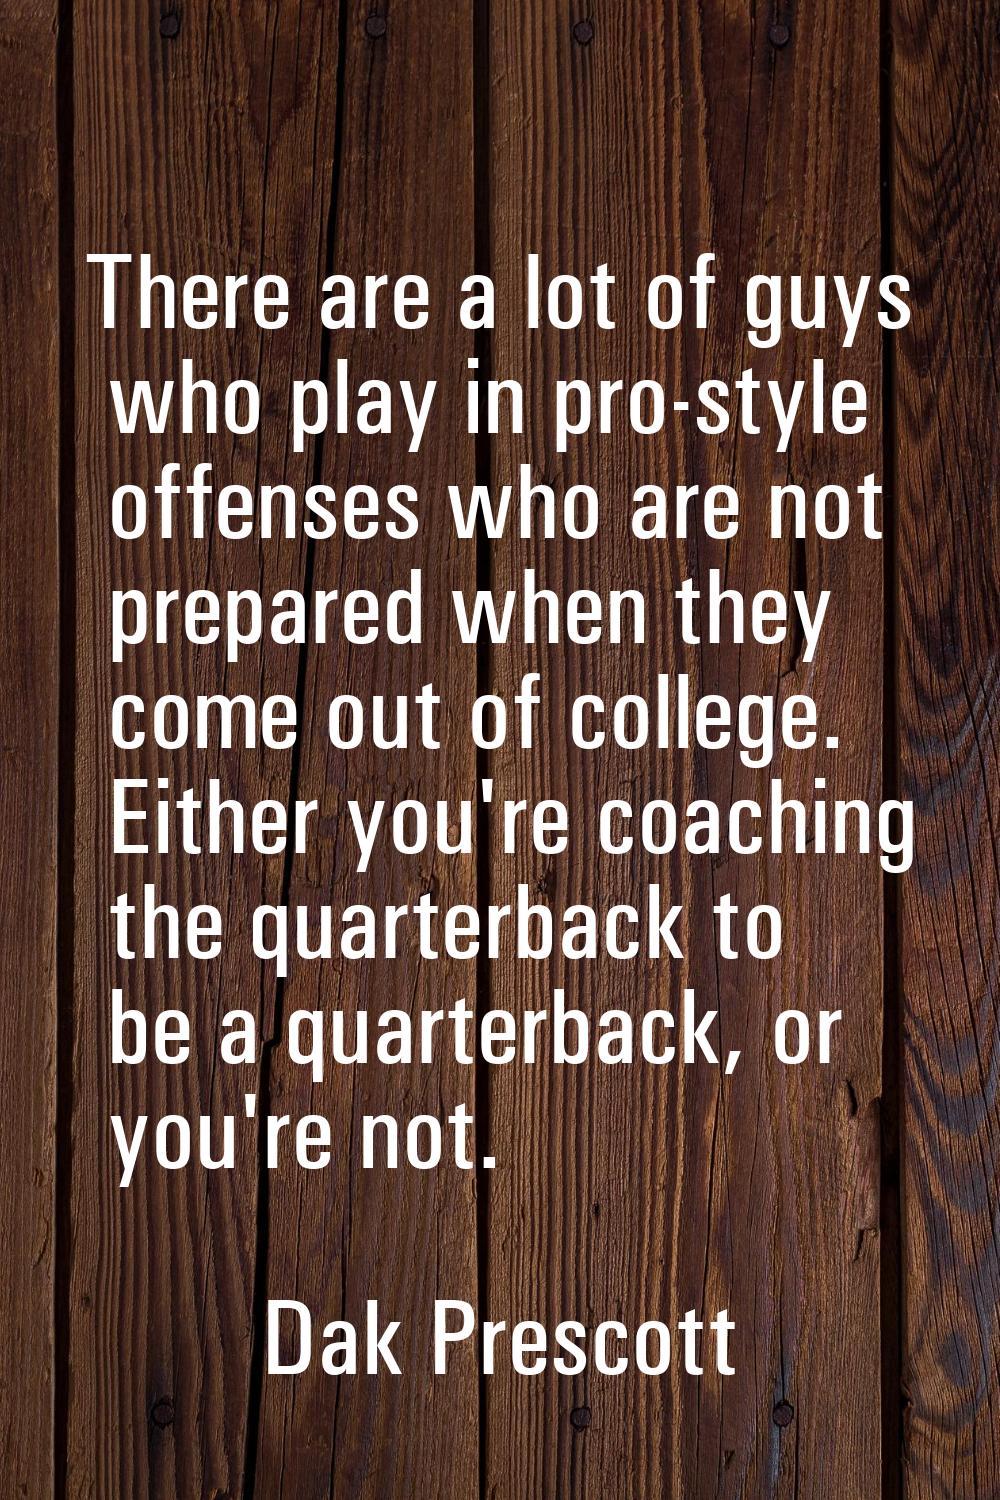 There are a lot of guys who play in pro-style offenses who are not prepared when they come out of c